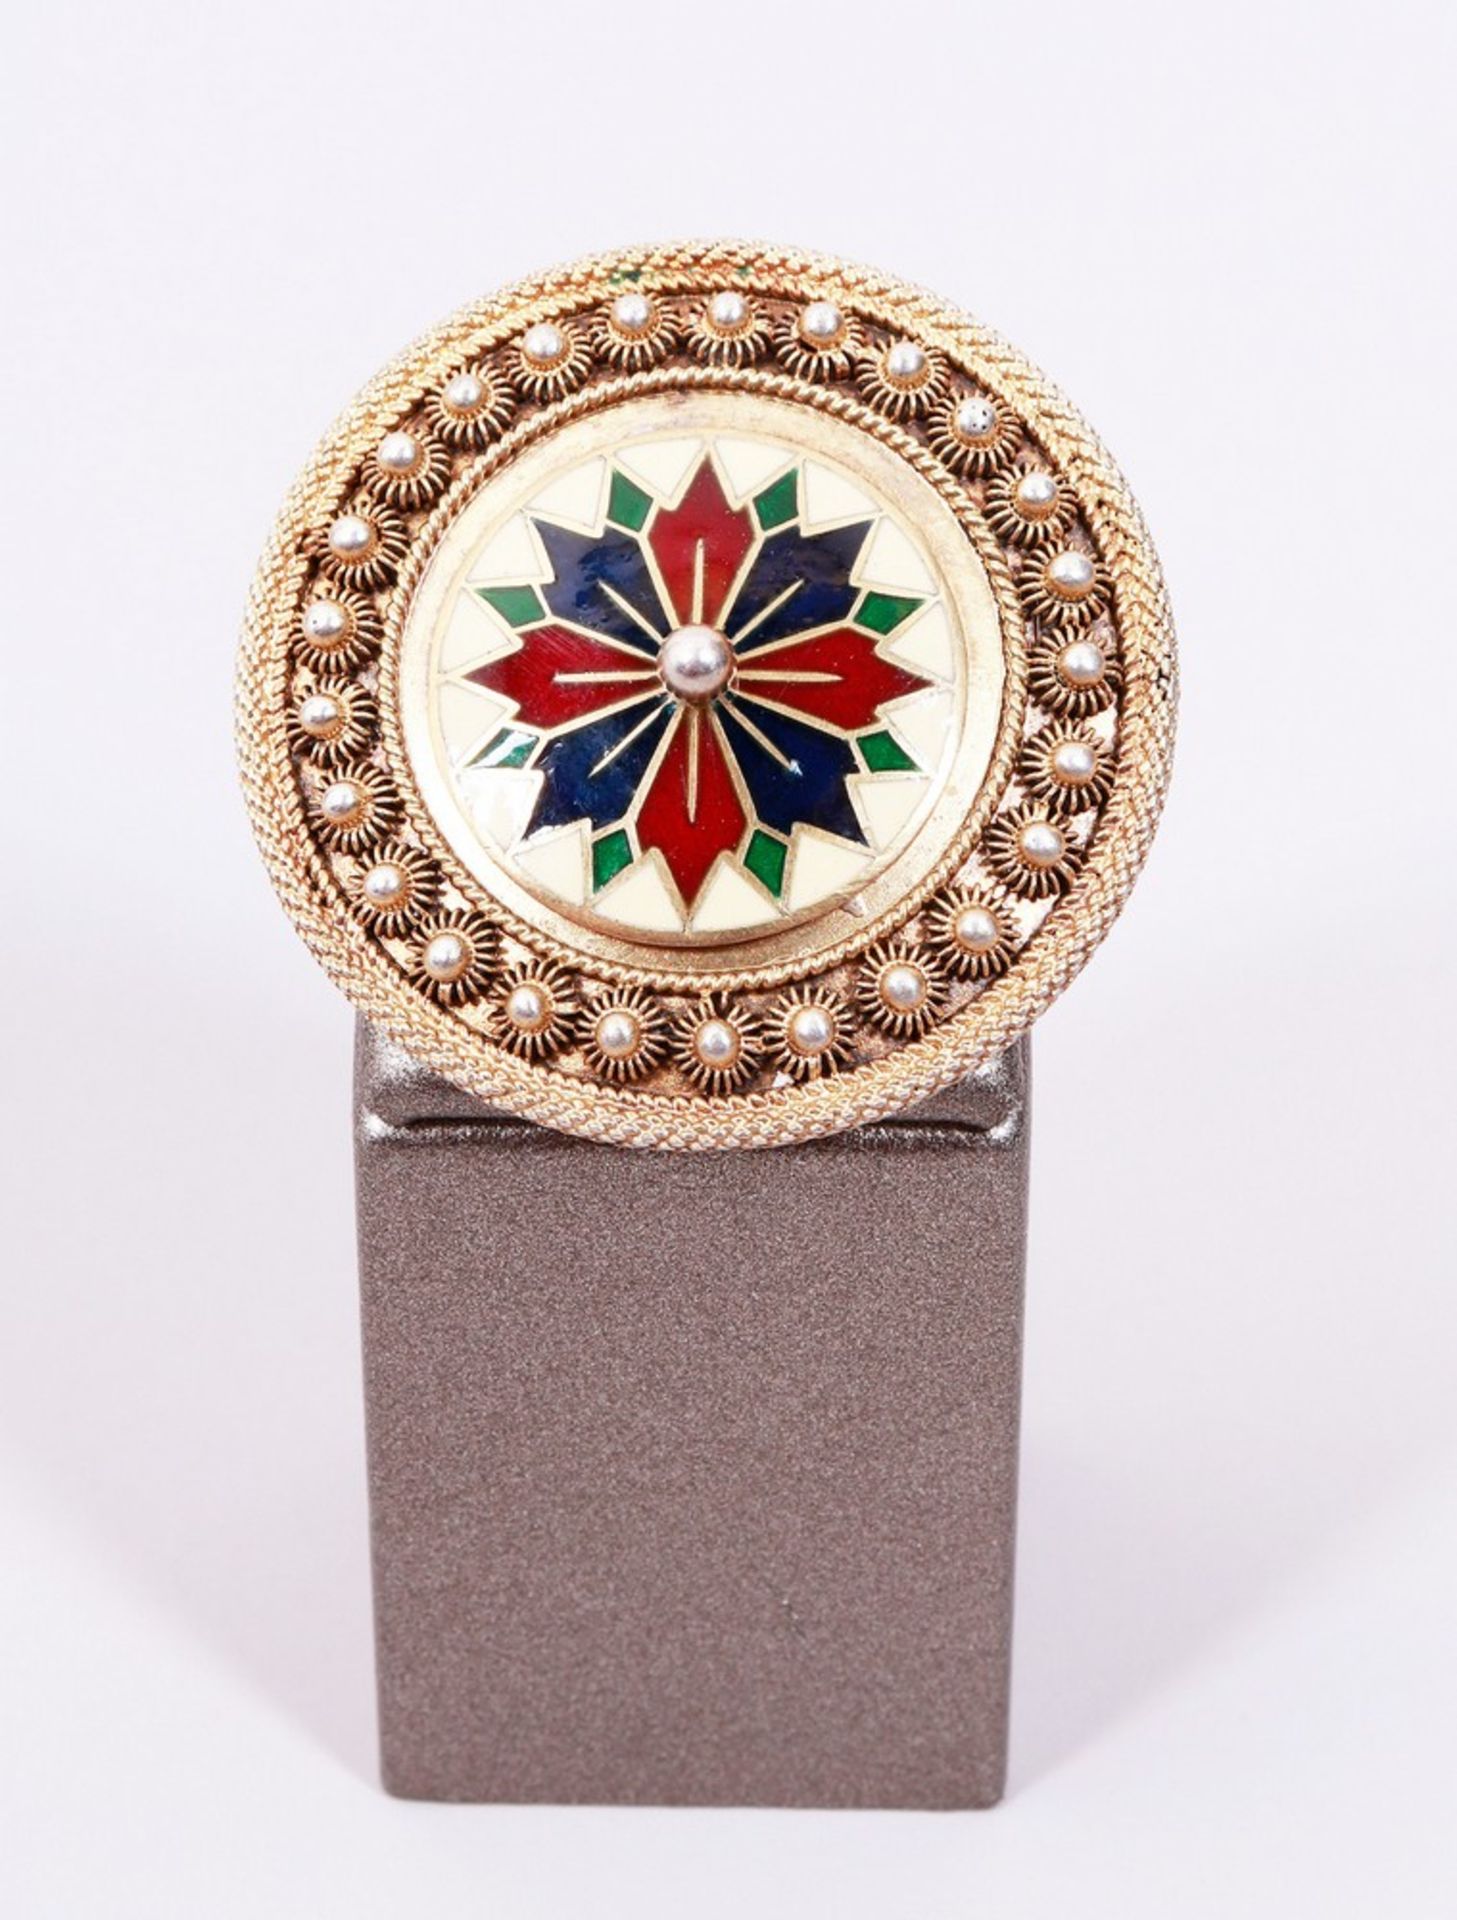 Traditional costume brooch, 830 silver/gold-plated, David Andersen, Christiania - Norway, c. 1900